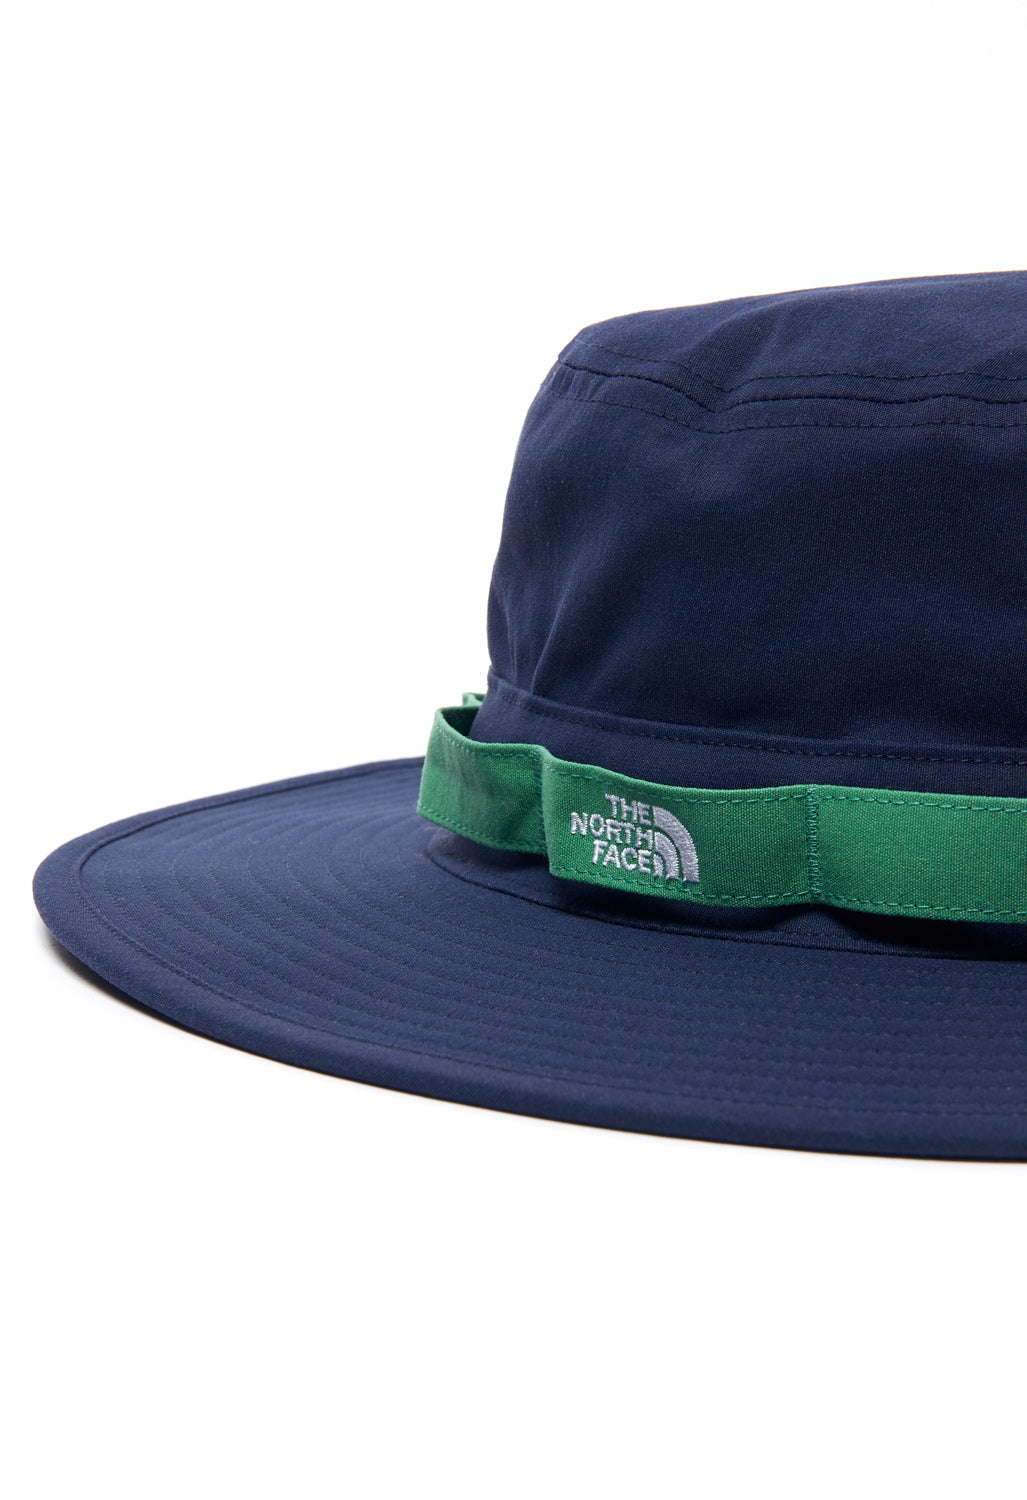 The North Face Class V Brimmer Hat - Summit Navy/Deep Grass